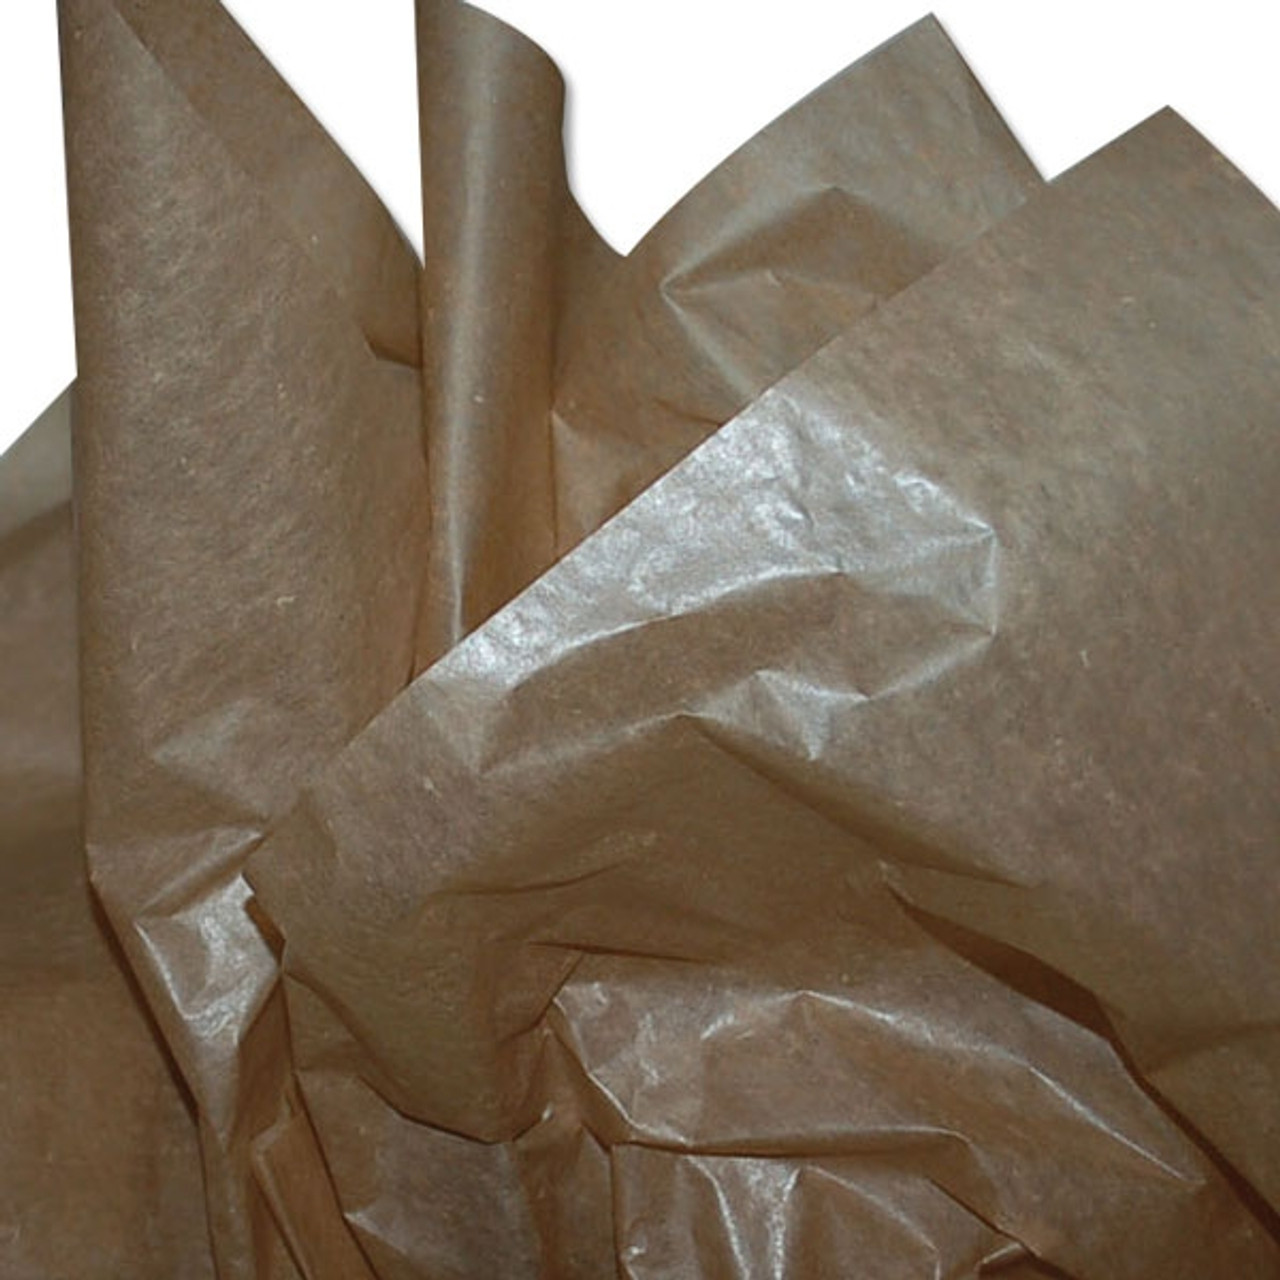 Dry Waxed Green Tissue Paper - 18 x 24 - 480 Sheets per Ream